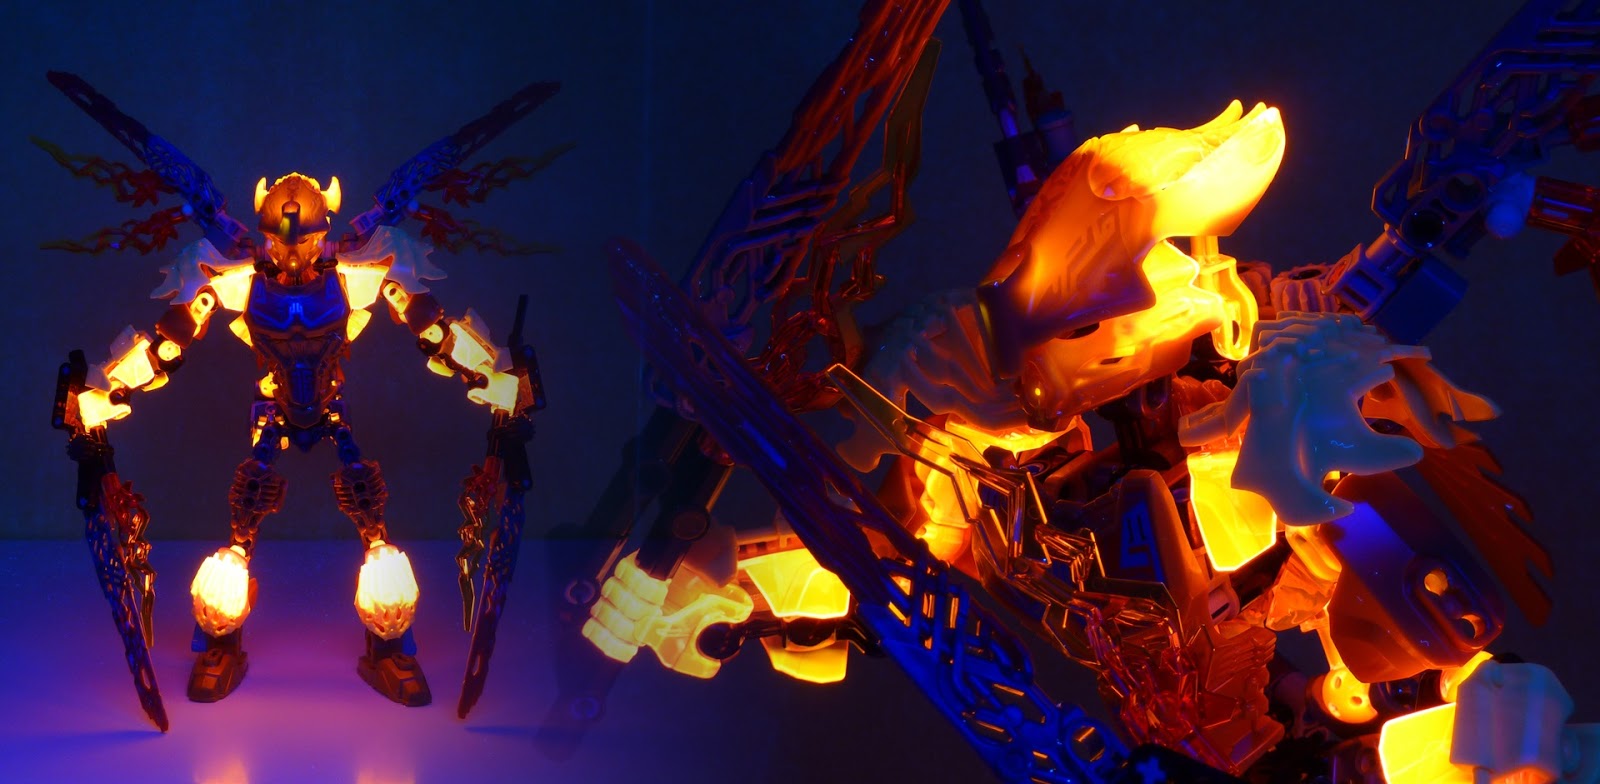 Rayque's Blog: [Lego] Black light - #71308 Tahu - Uniter of Fire, #71303 Ikir Creature of Fire